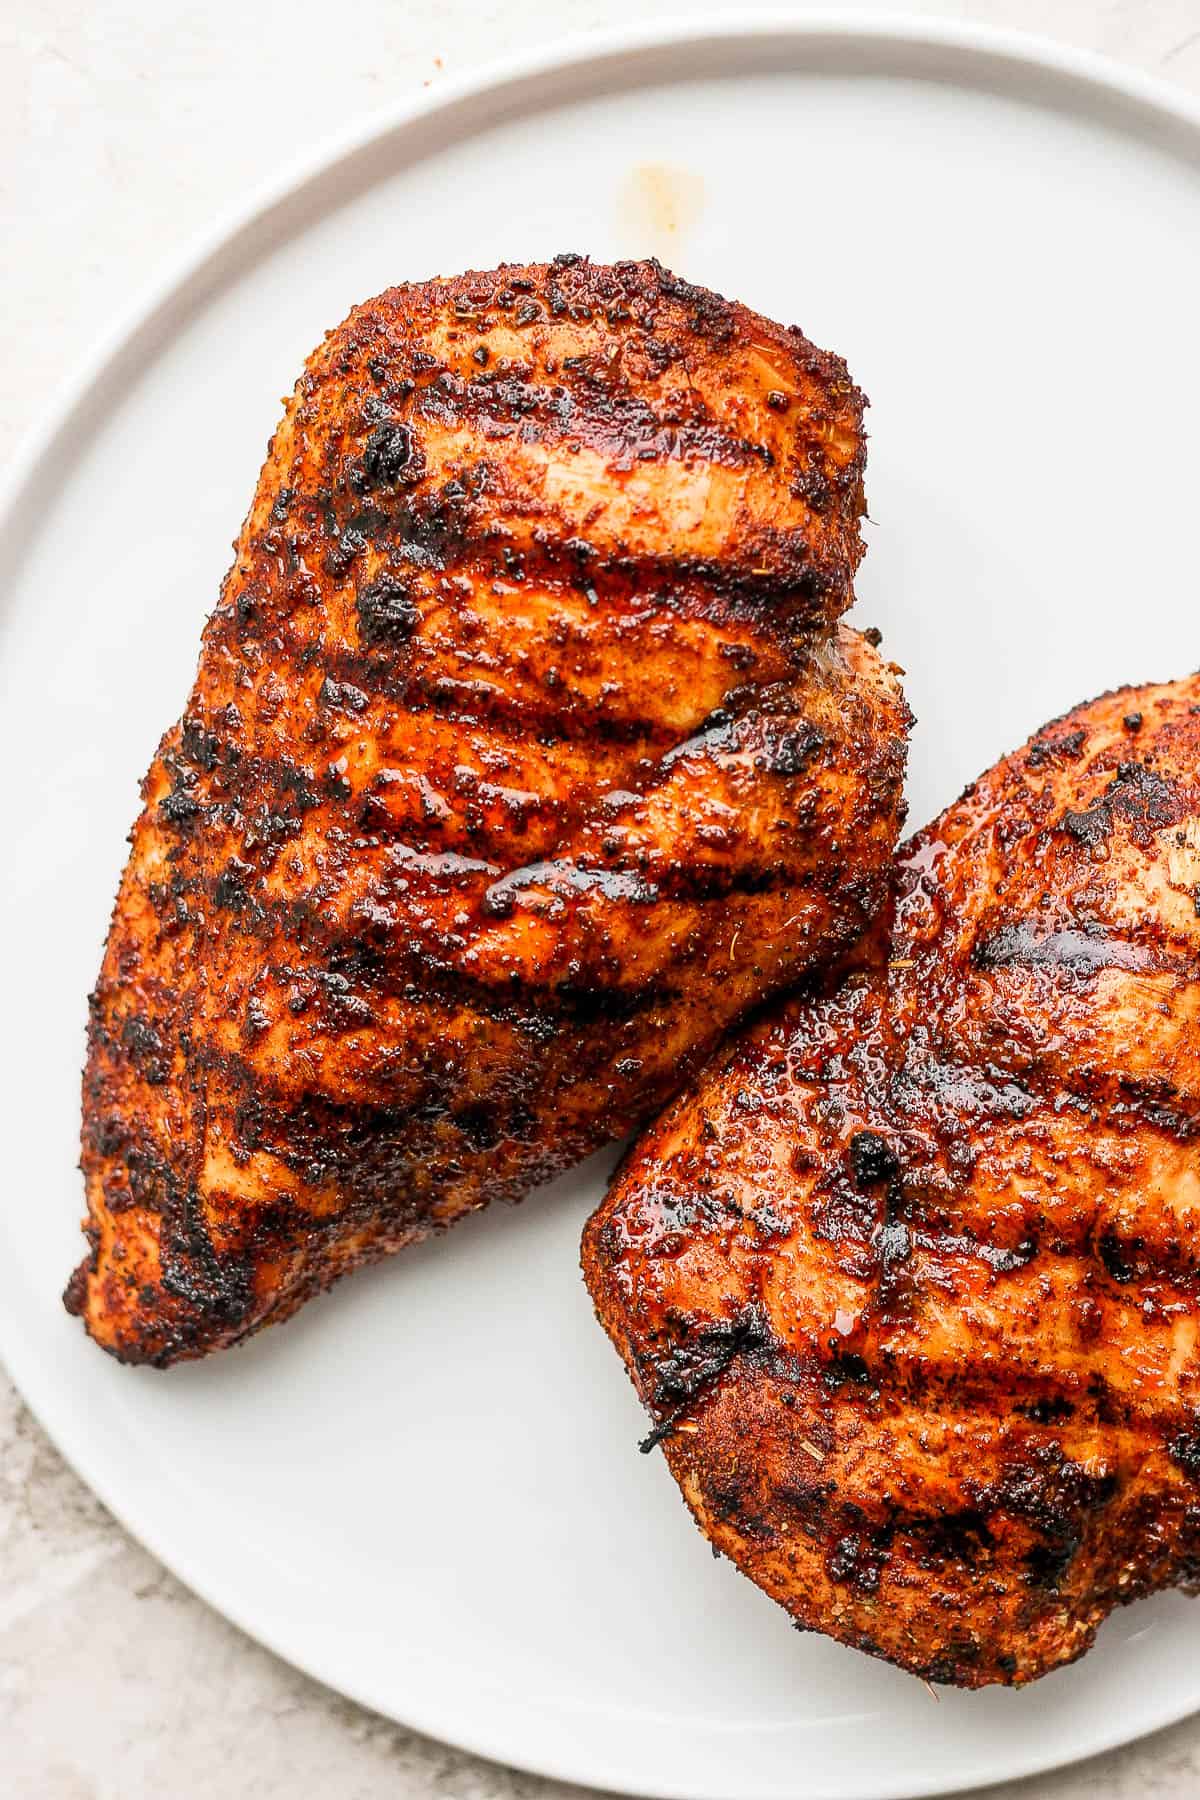 Seasoned chicken breasts after being grilled.